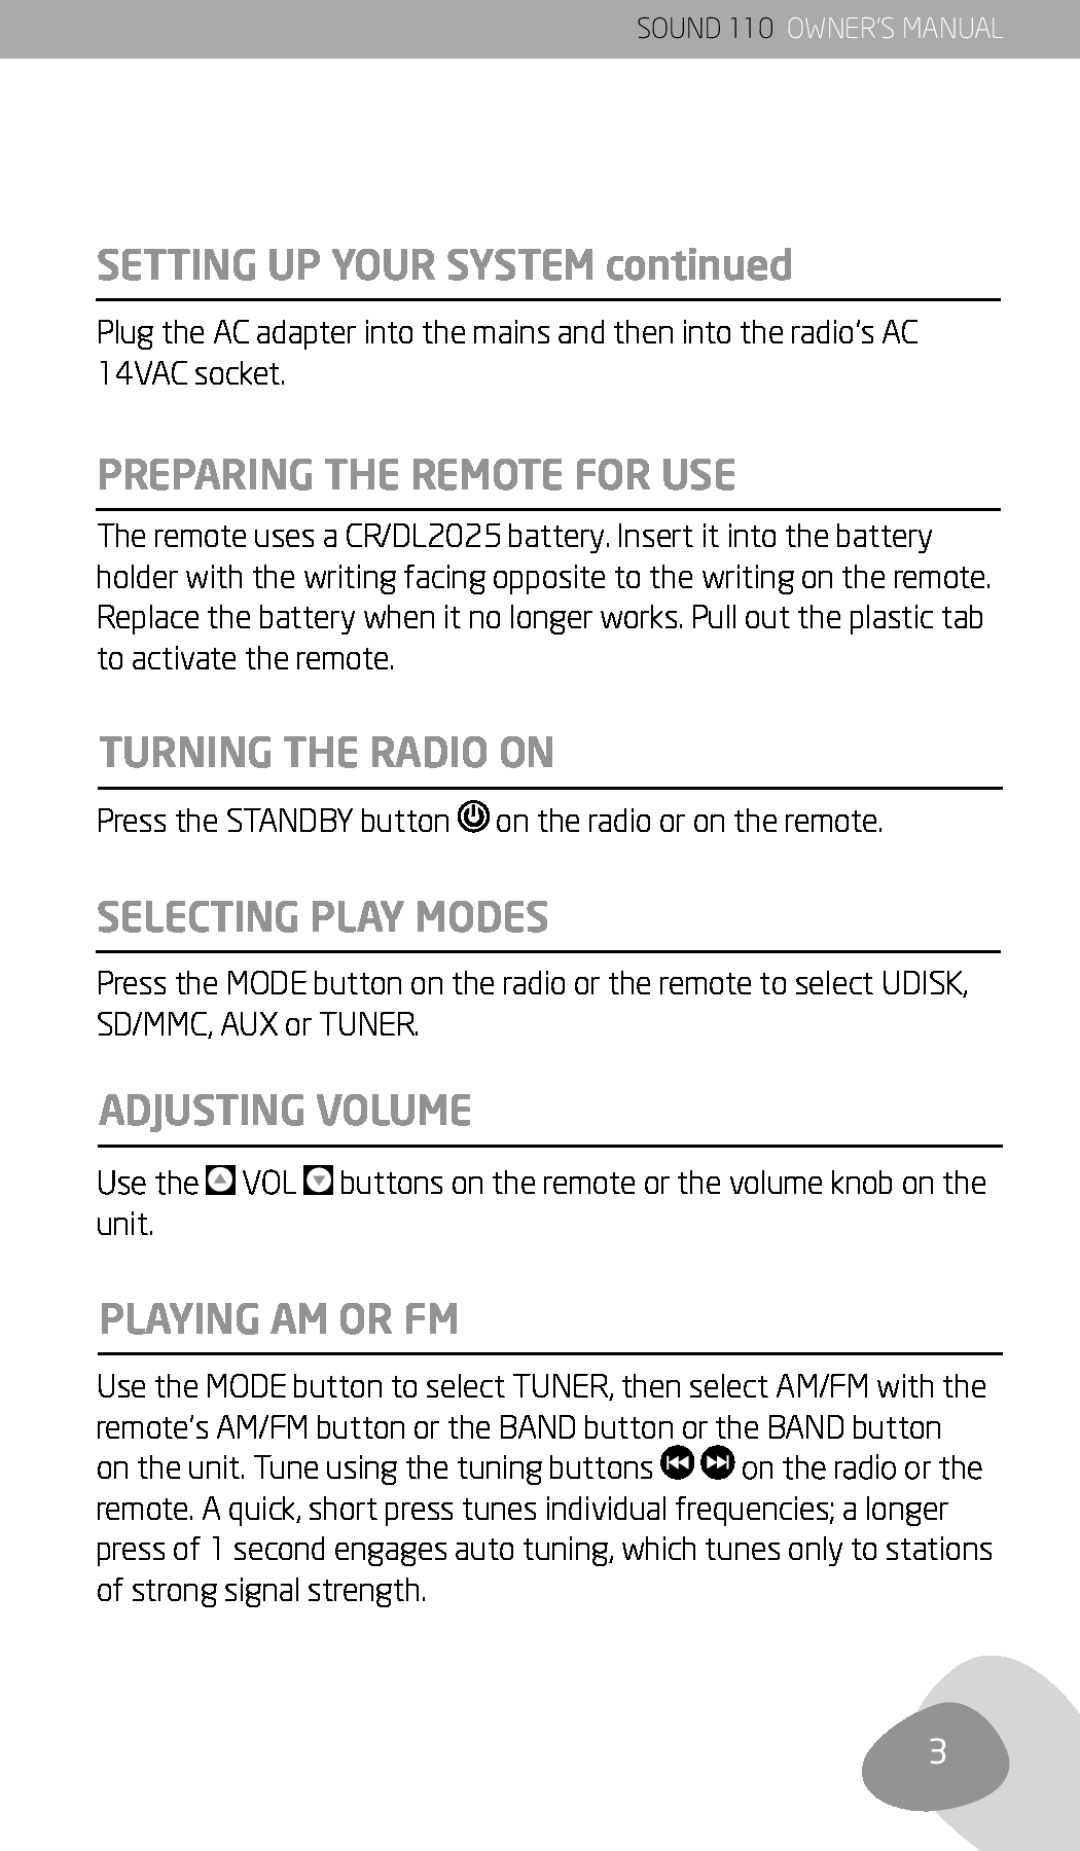 Eton 110 SETTING UP YOUR SYSTEM continued, Preparing The Remote For Use, Turning The Radio On, Selecting Play Modes 